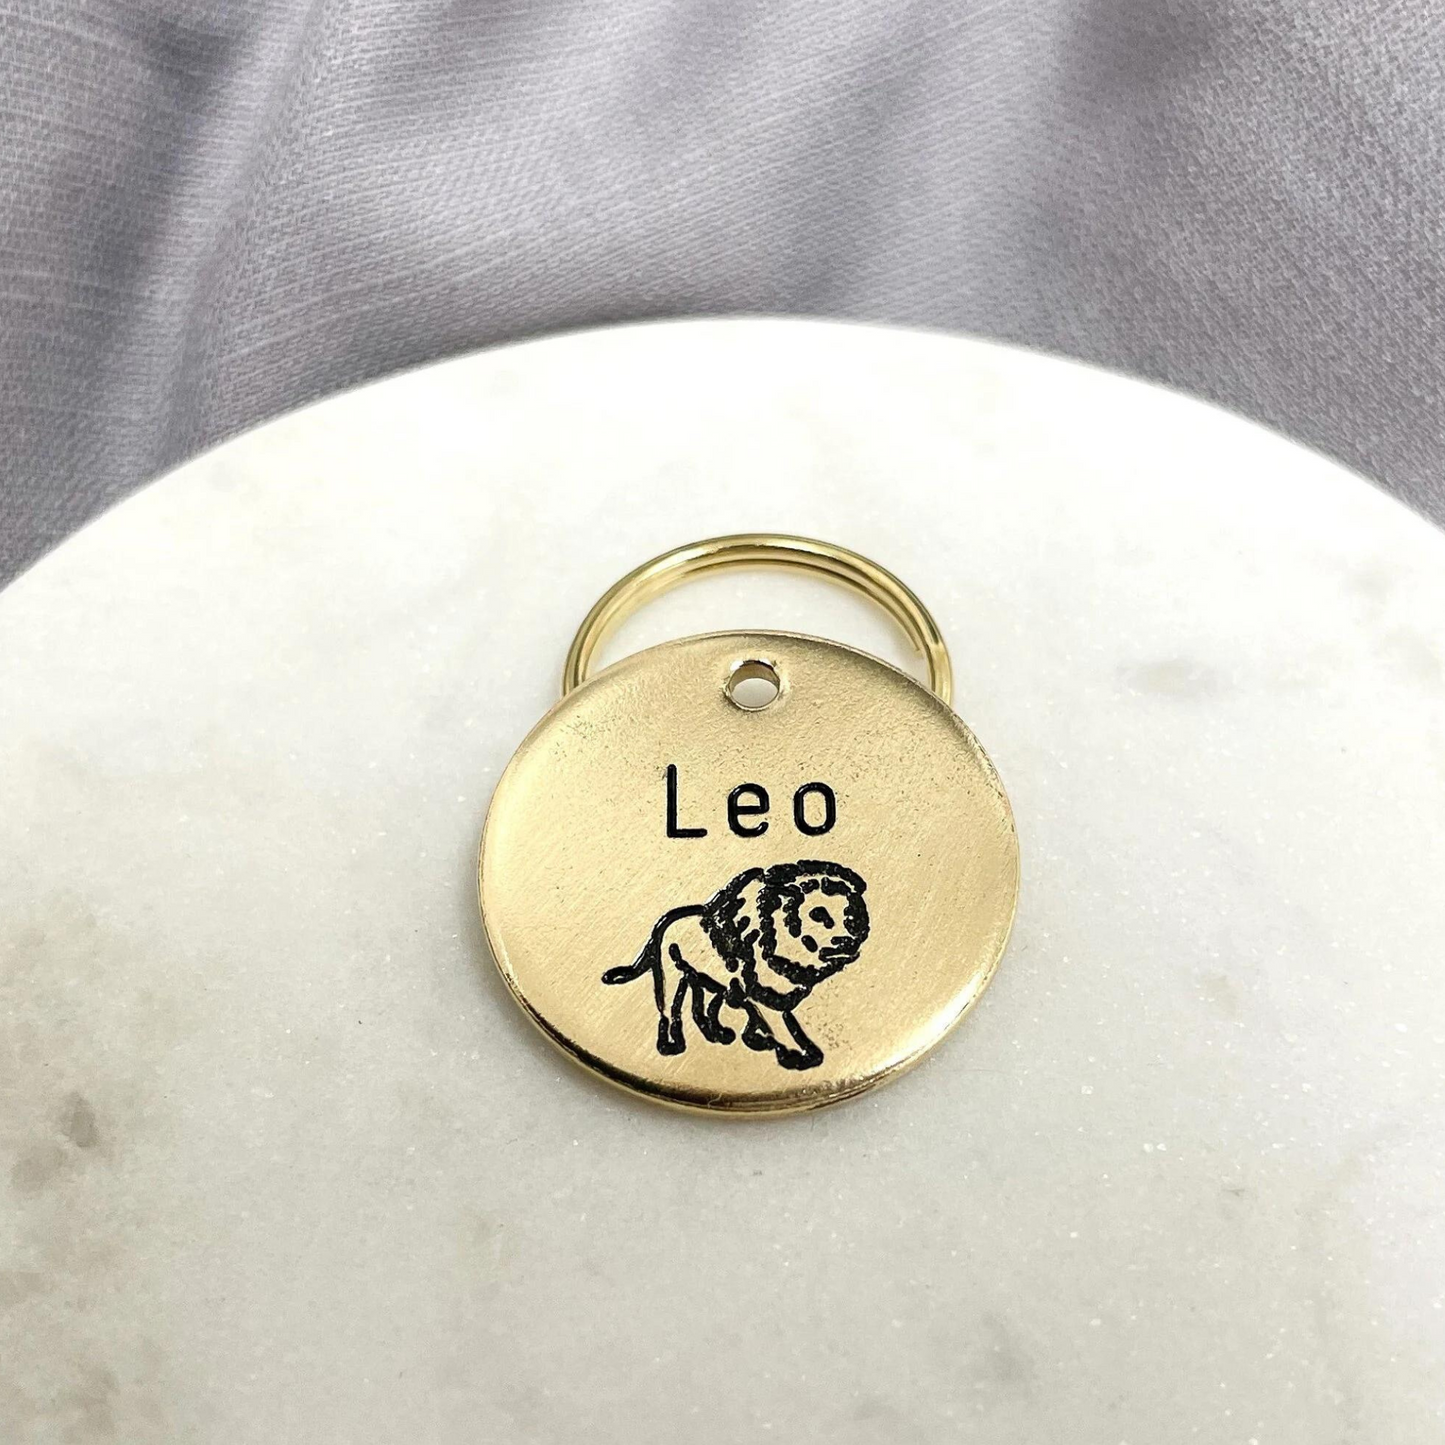 Personalized Dog Collar Charm - Engraved Design - Dog Collar Charm - Nature - Lions - Leo - Lion